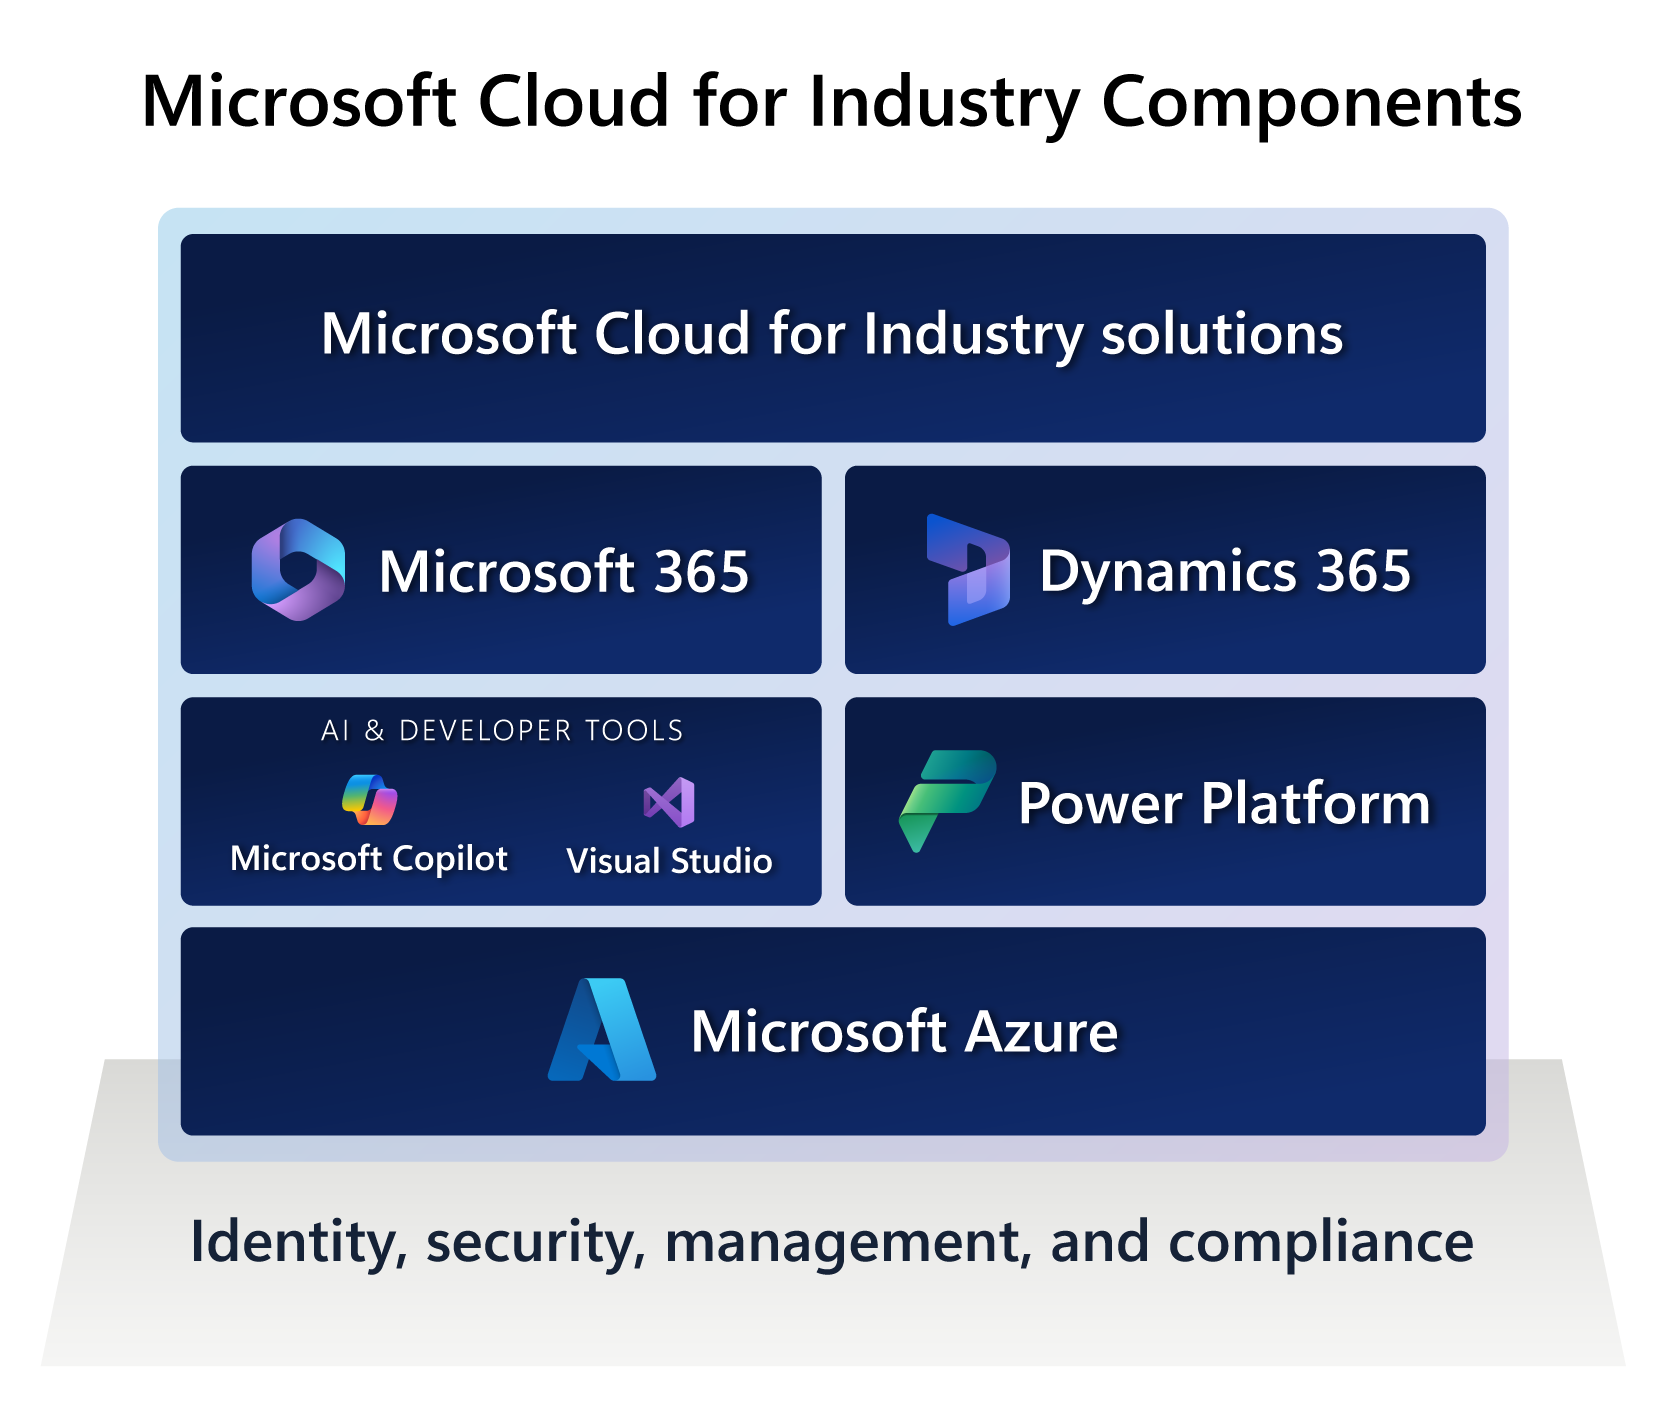 A diagram showing the four key building blocks for Microsoft Cloud industry solutions.